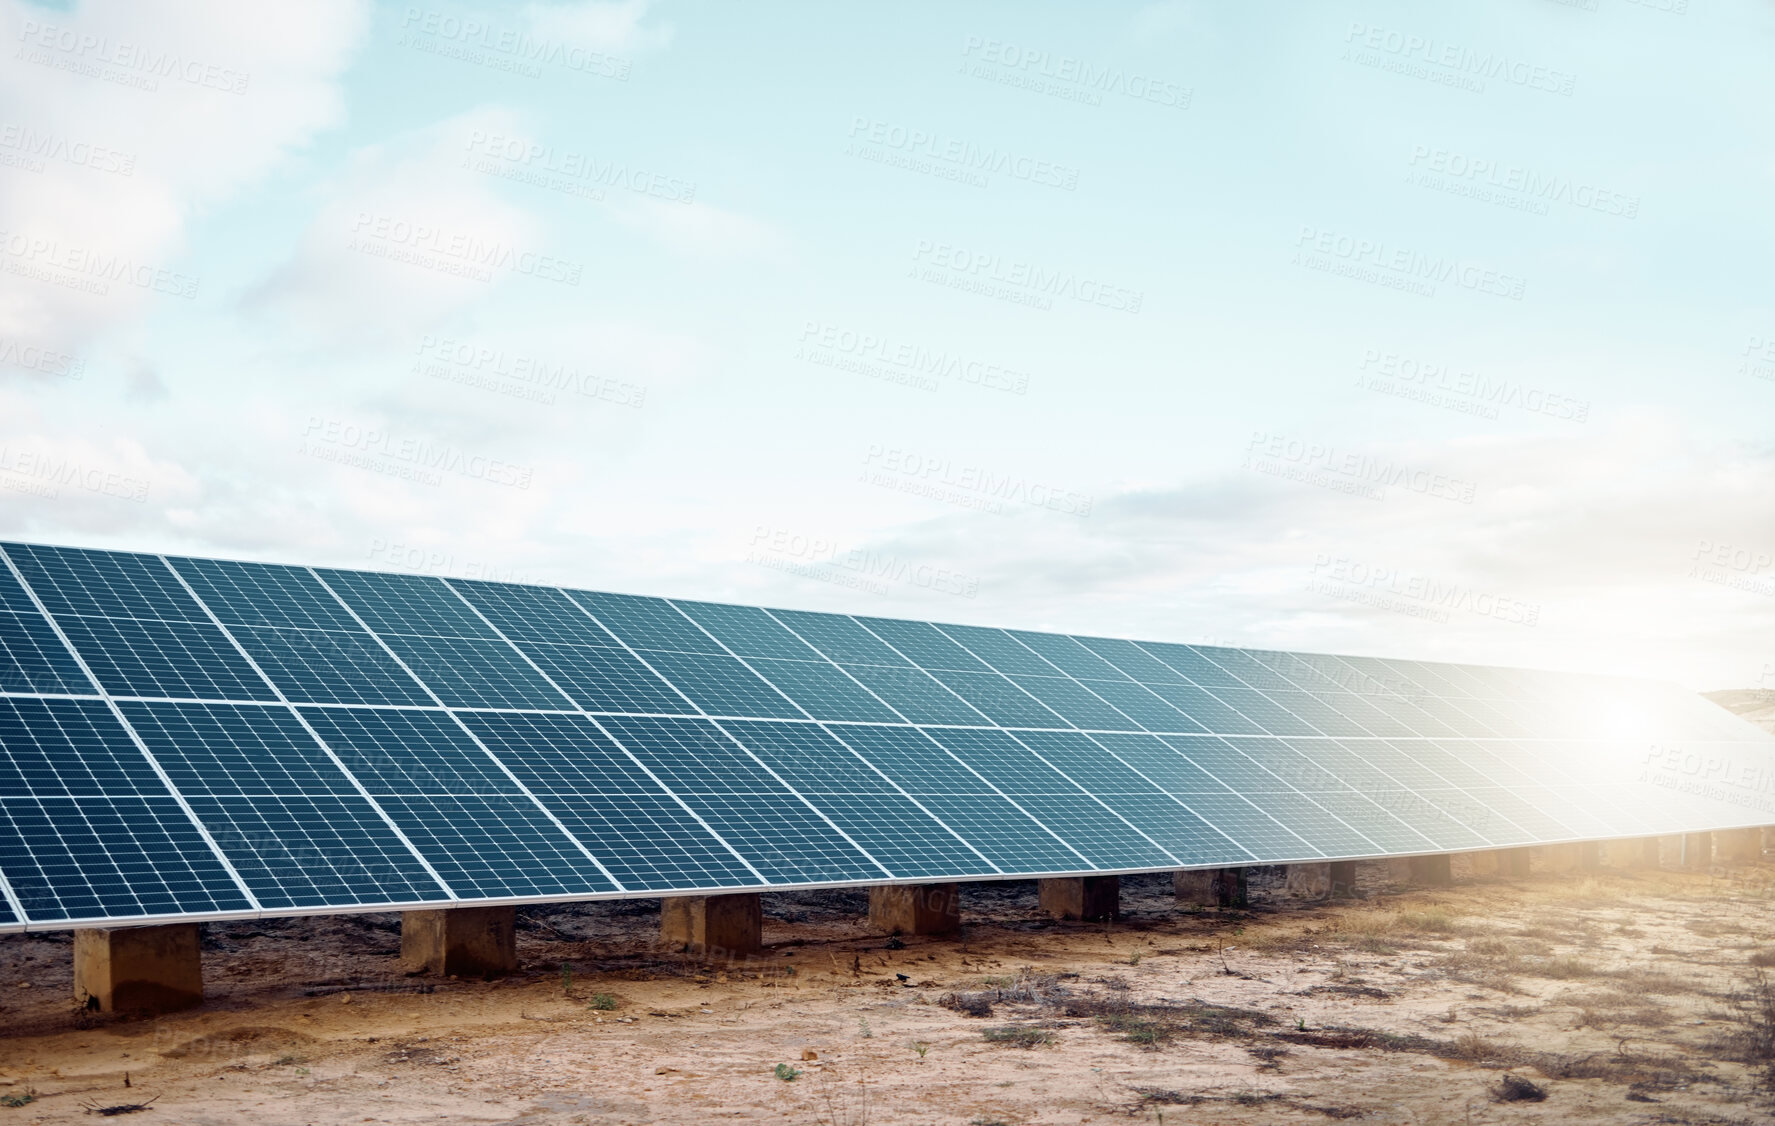 Buy stock photo Solar panels, renewable energy and engineering for sustainability, eco friendly and clean electricity background. Agriculture, photovoltaic grid design and countryside sun on blue sky mockup or space